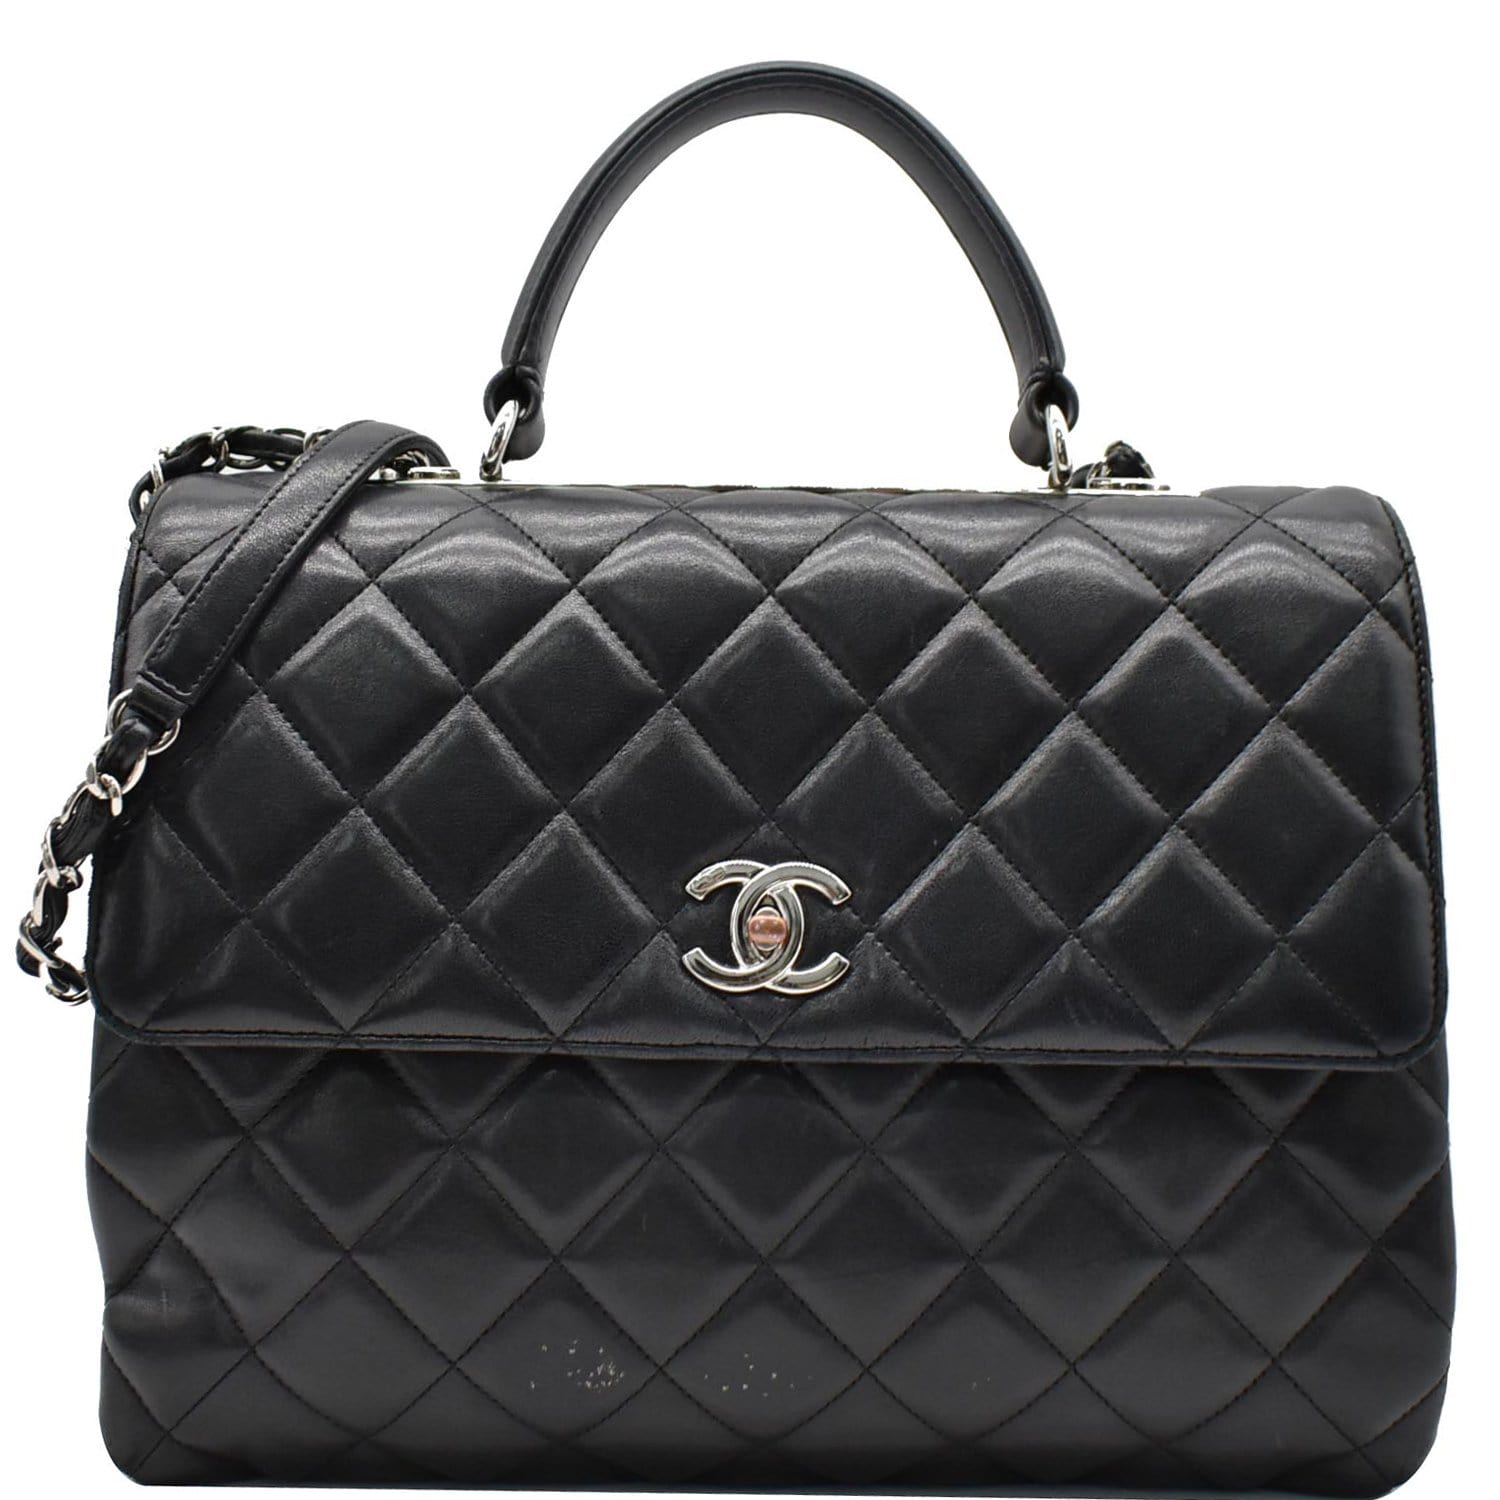 #18 Almost New Chanel Boy Large Black Lamb with RHW